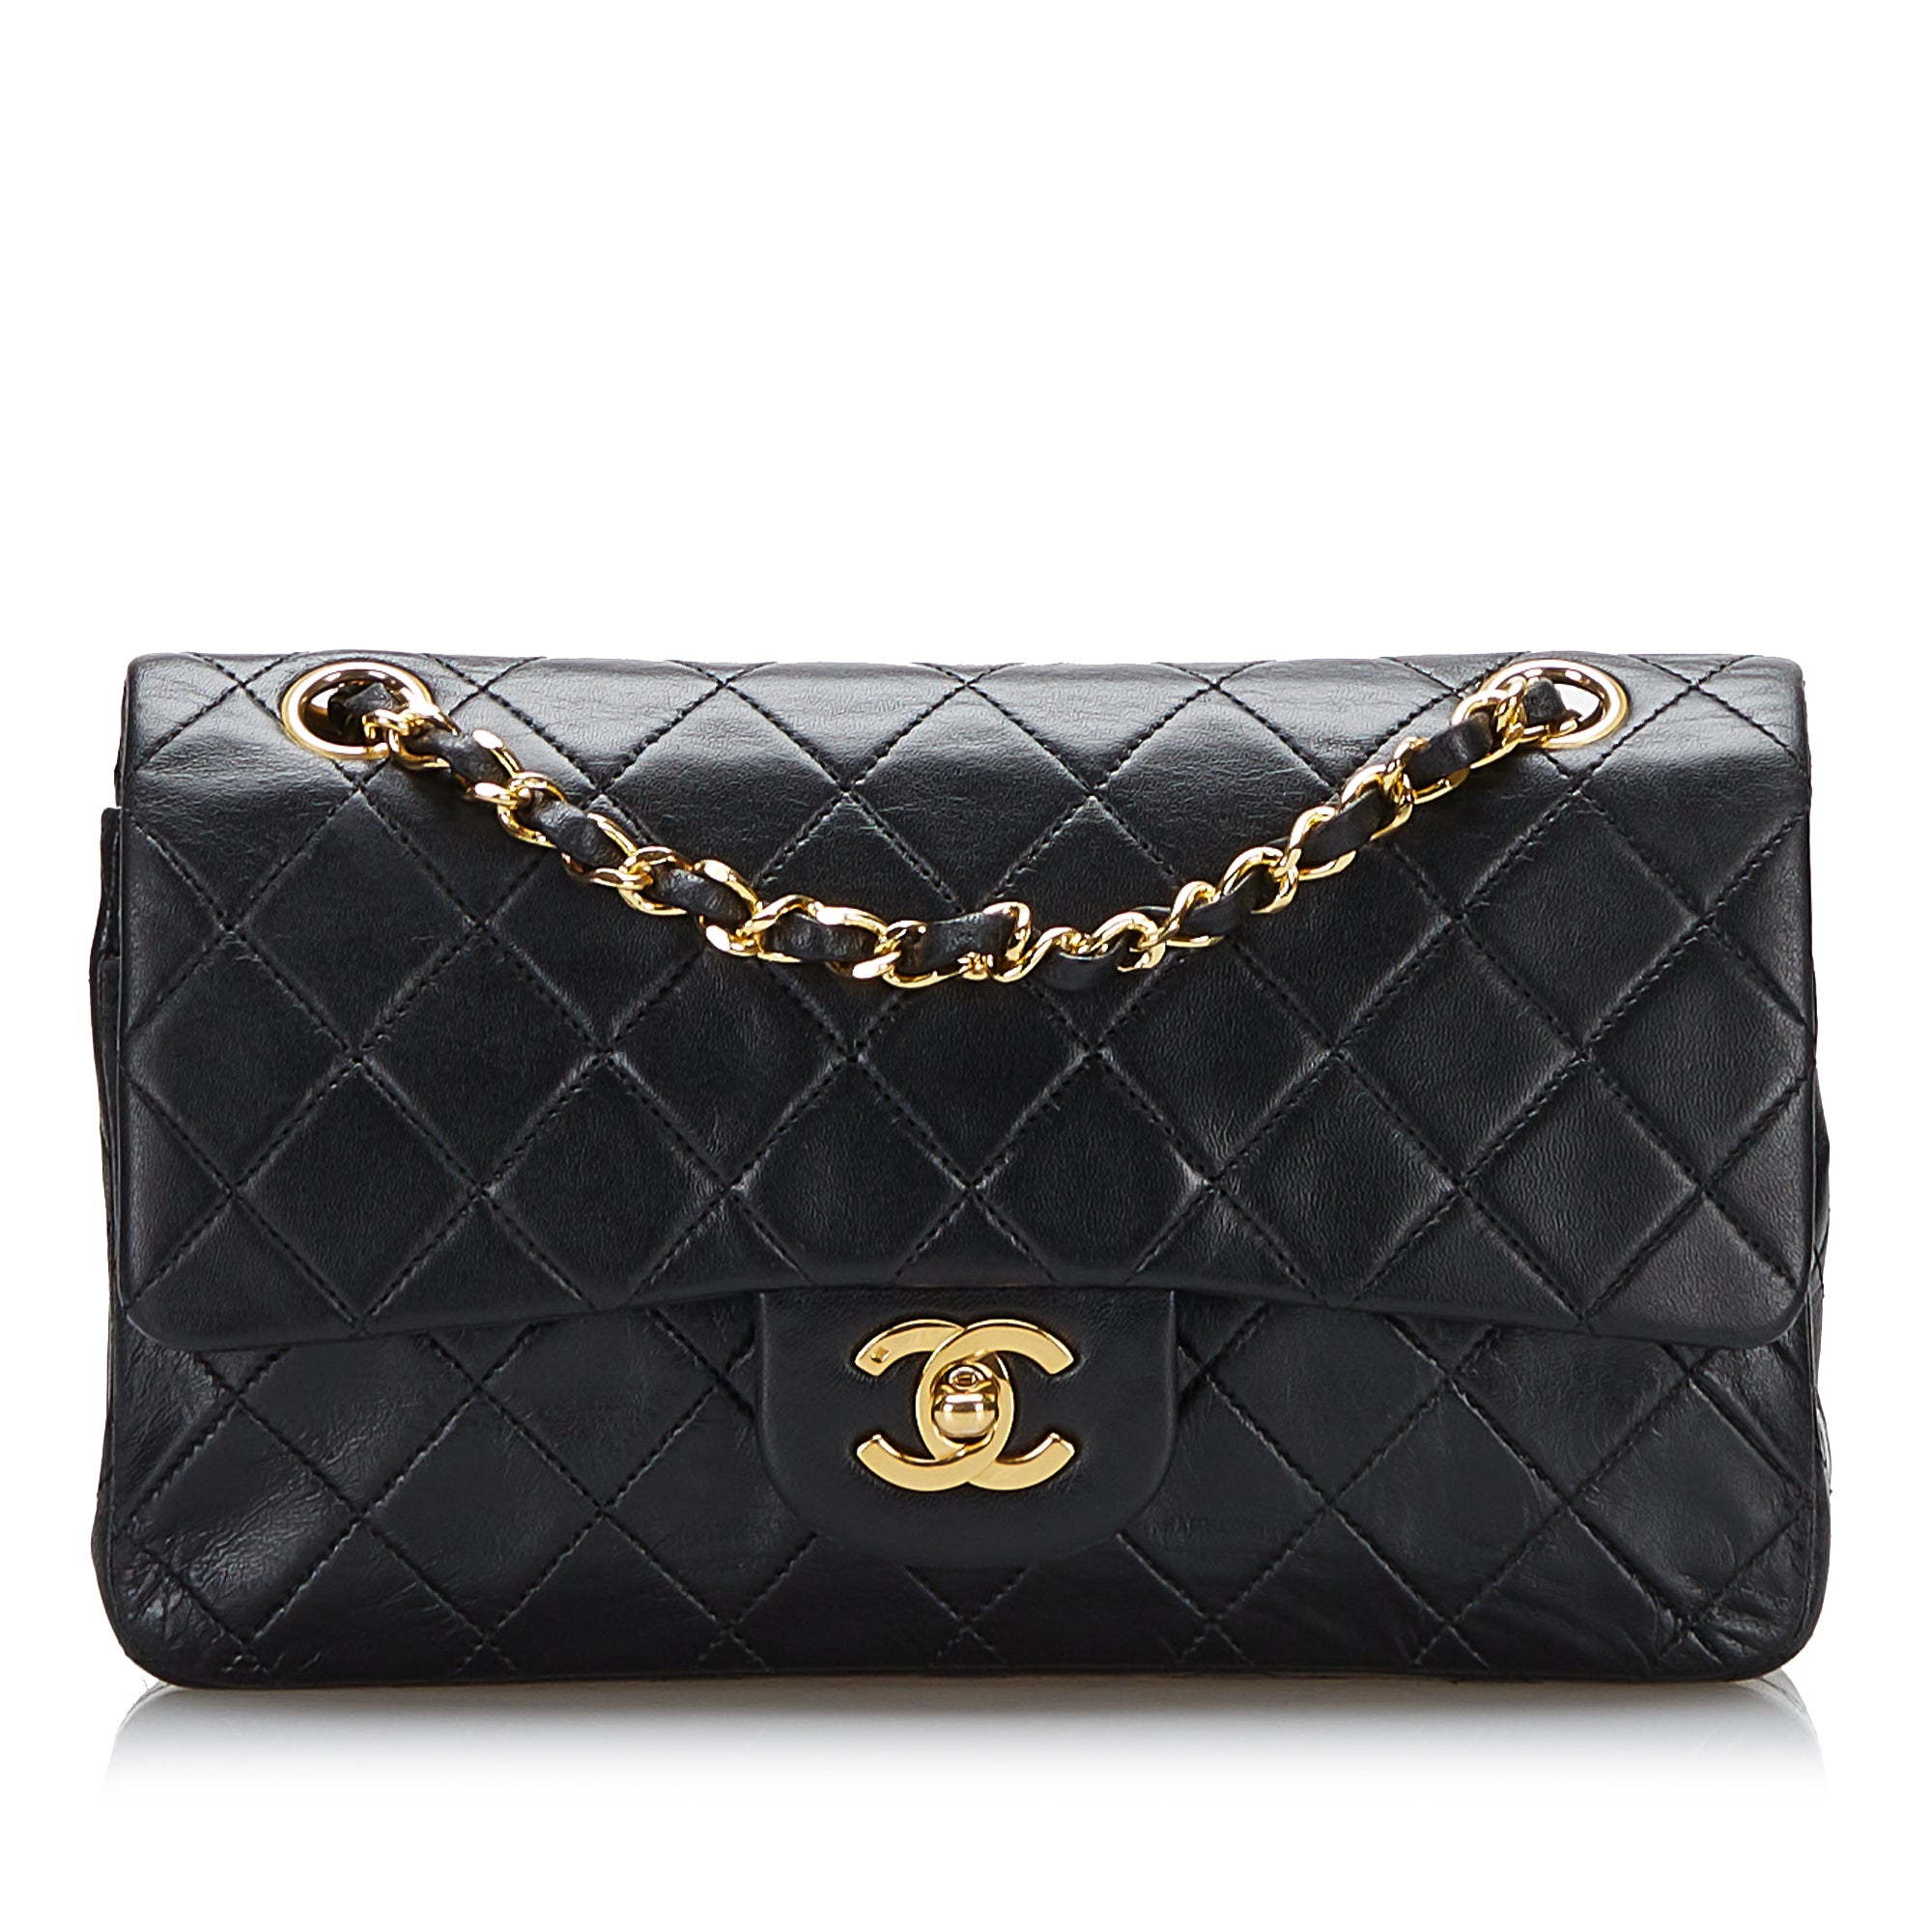 Black Chanel logo Classic Small Lambskin Double Flap Bag, RvceShops  Revival